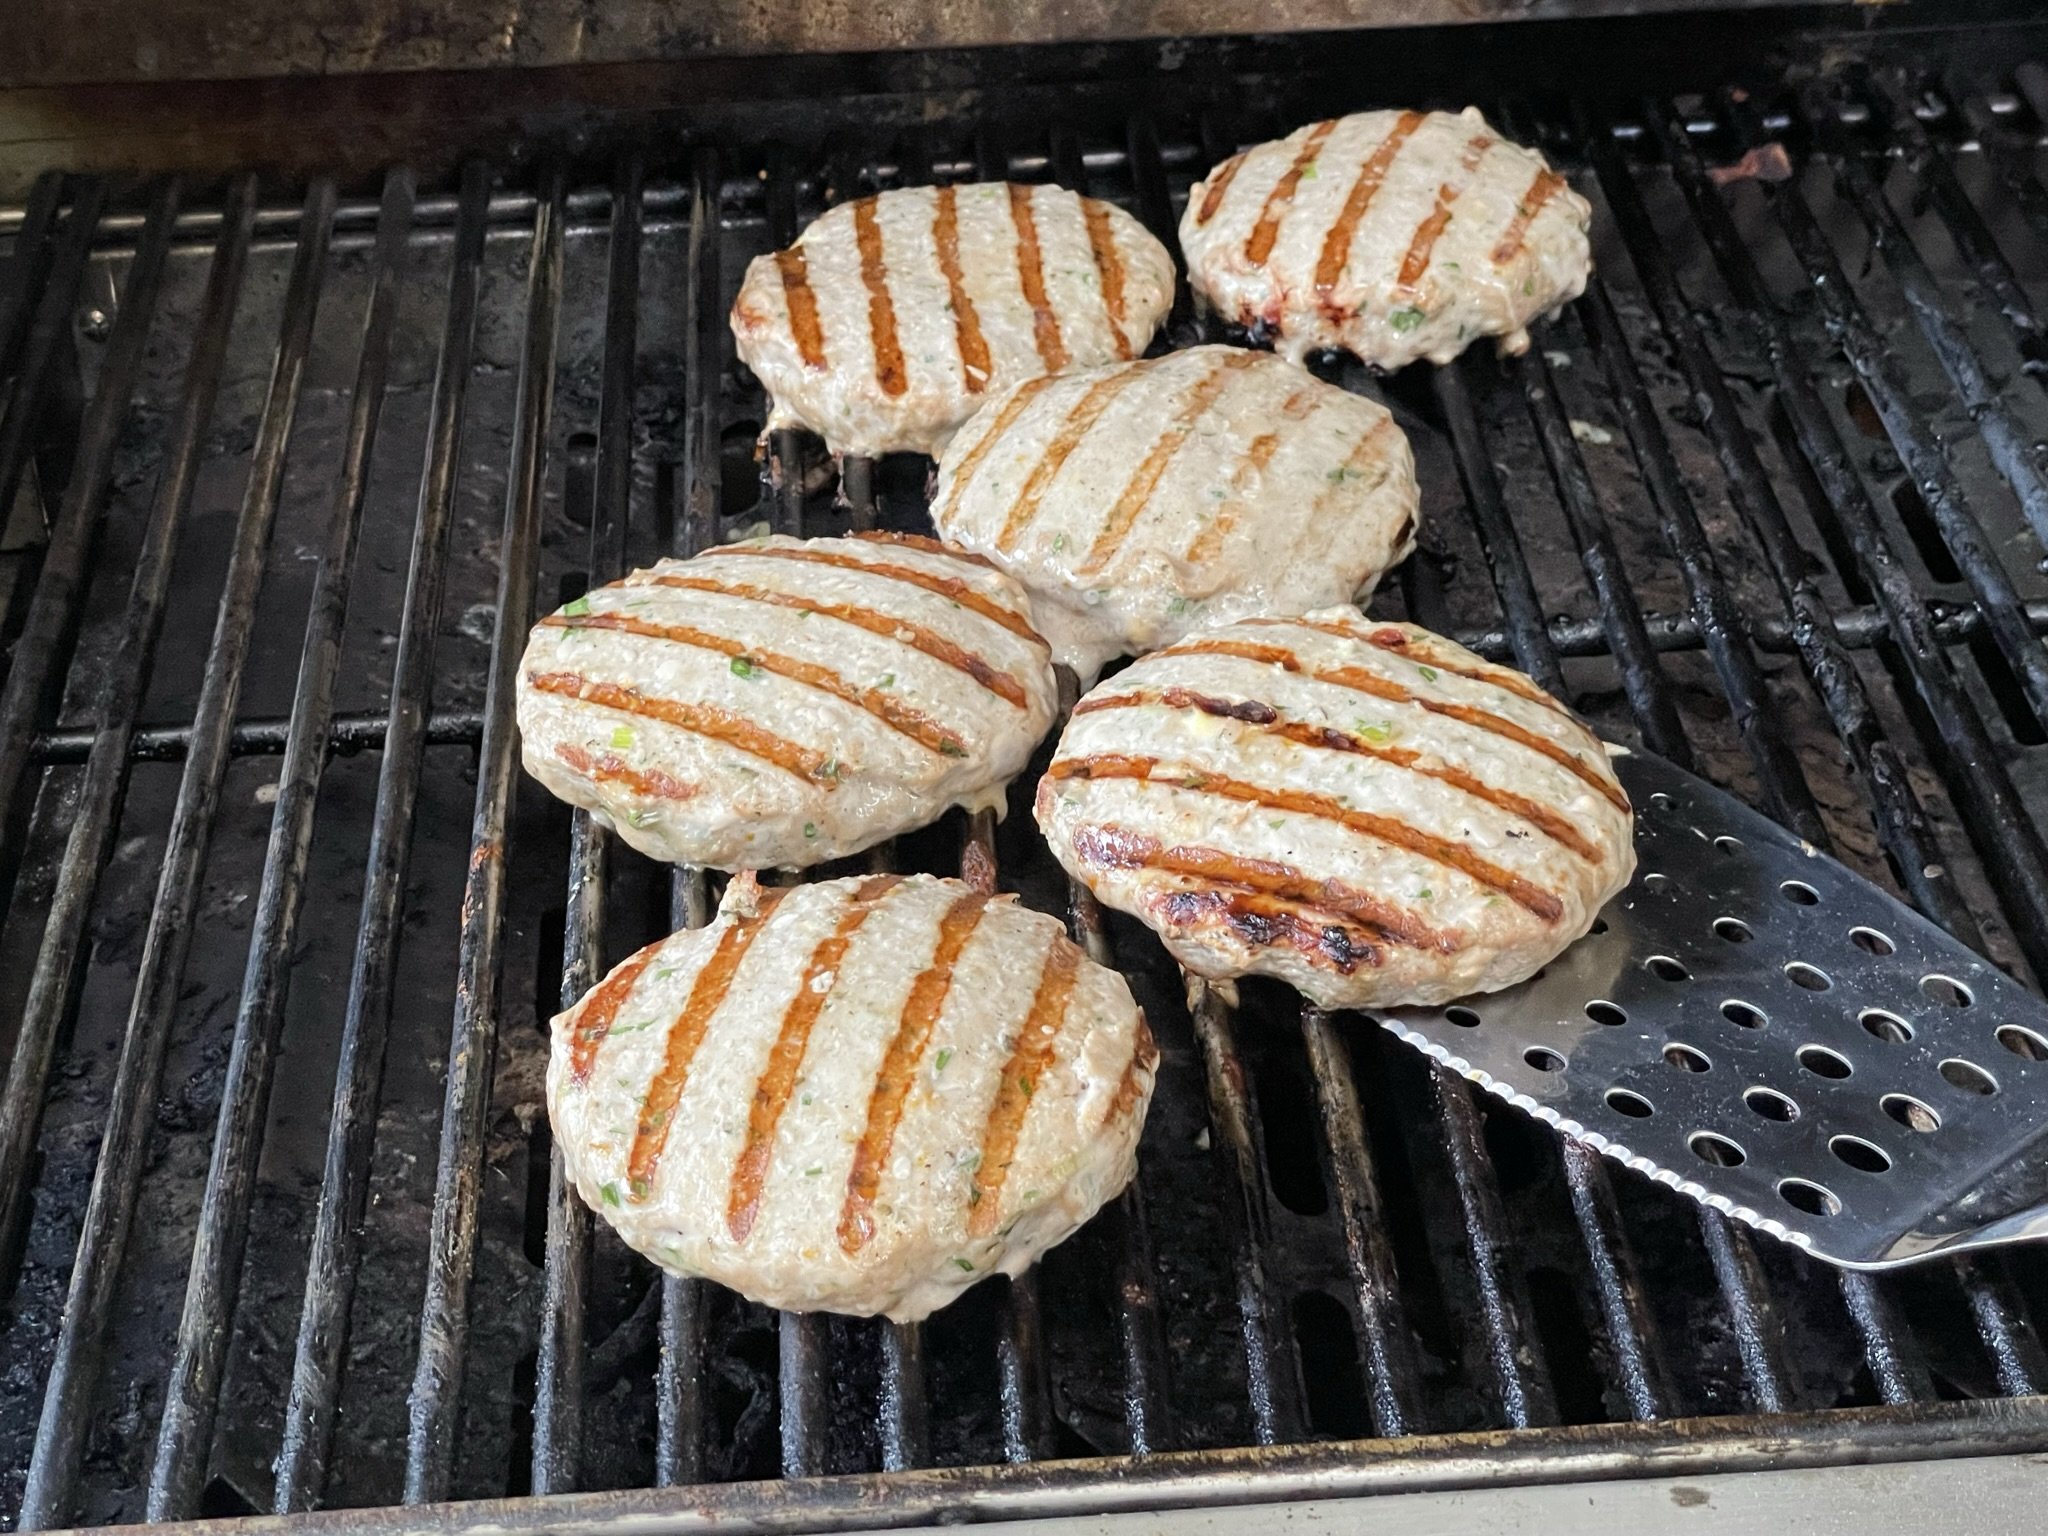 Burgers are cooked!